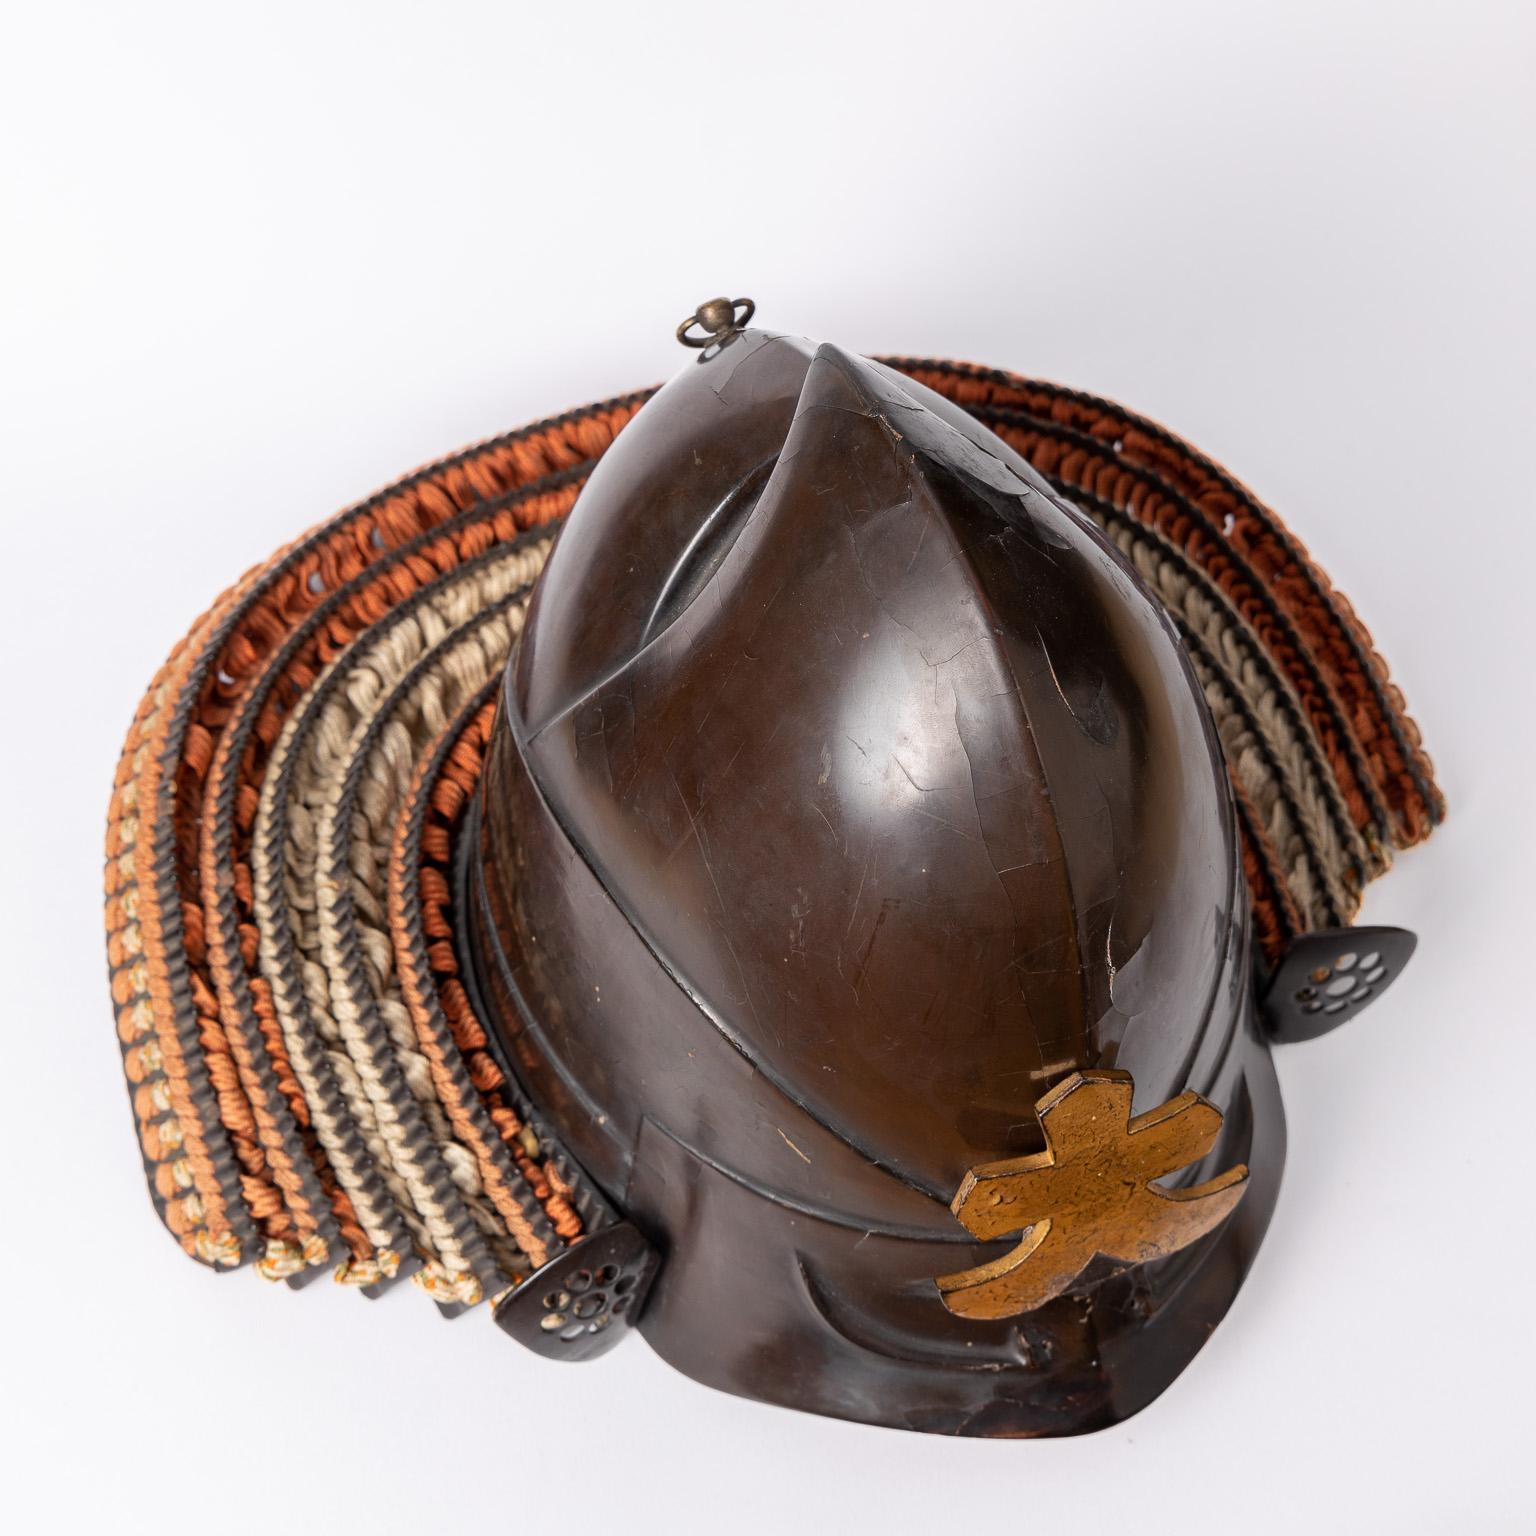 Kani-nari kabuto
Samurai helmet shaped as a crab’s claw

Edo period, 18th century

 

In feudal Japan, the crab was regarded as a majestic creature and was a symbol of the authority of early samurai warriors. In a well-known fairy tale, it is